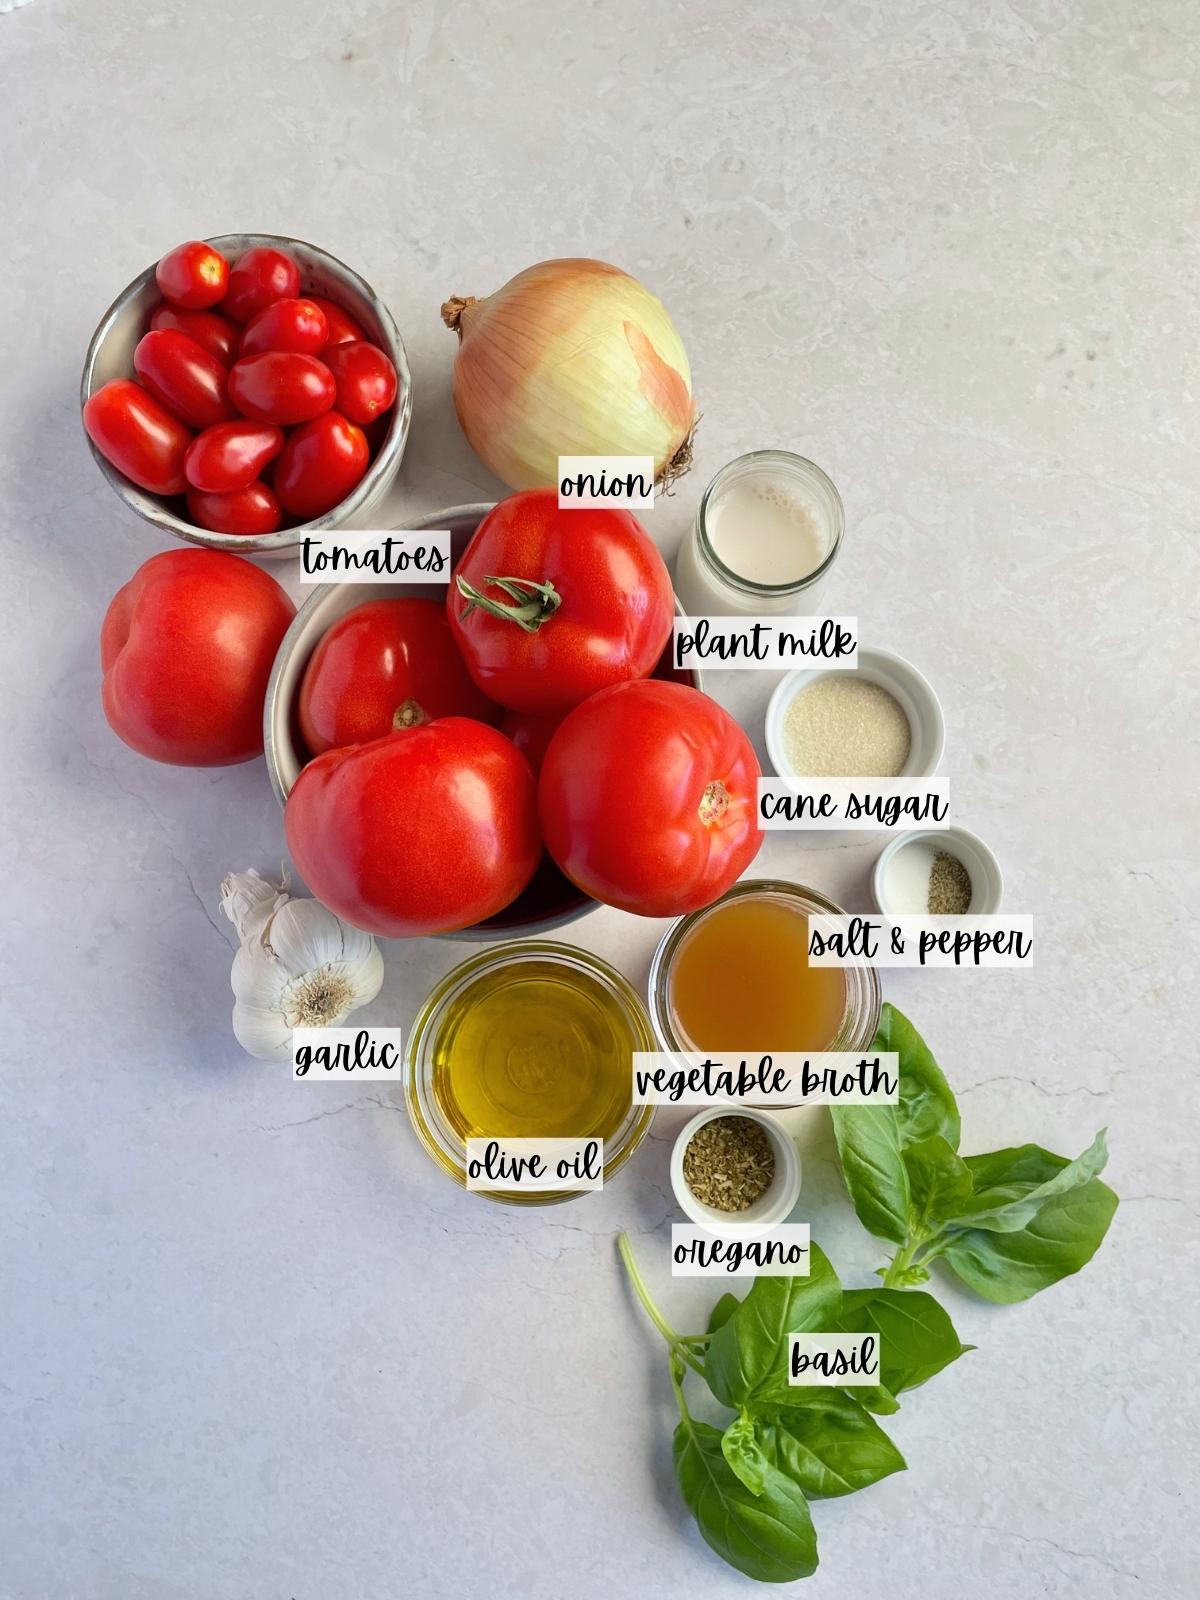 Labeled ingredients for tomato soup.